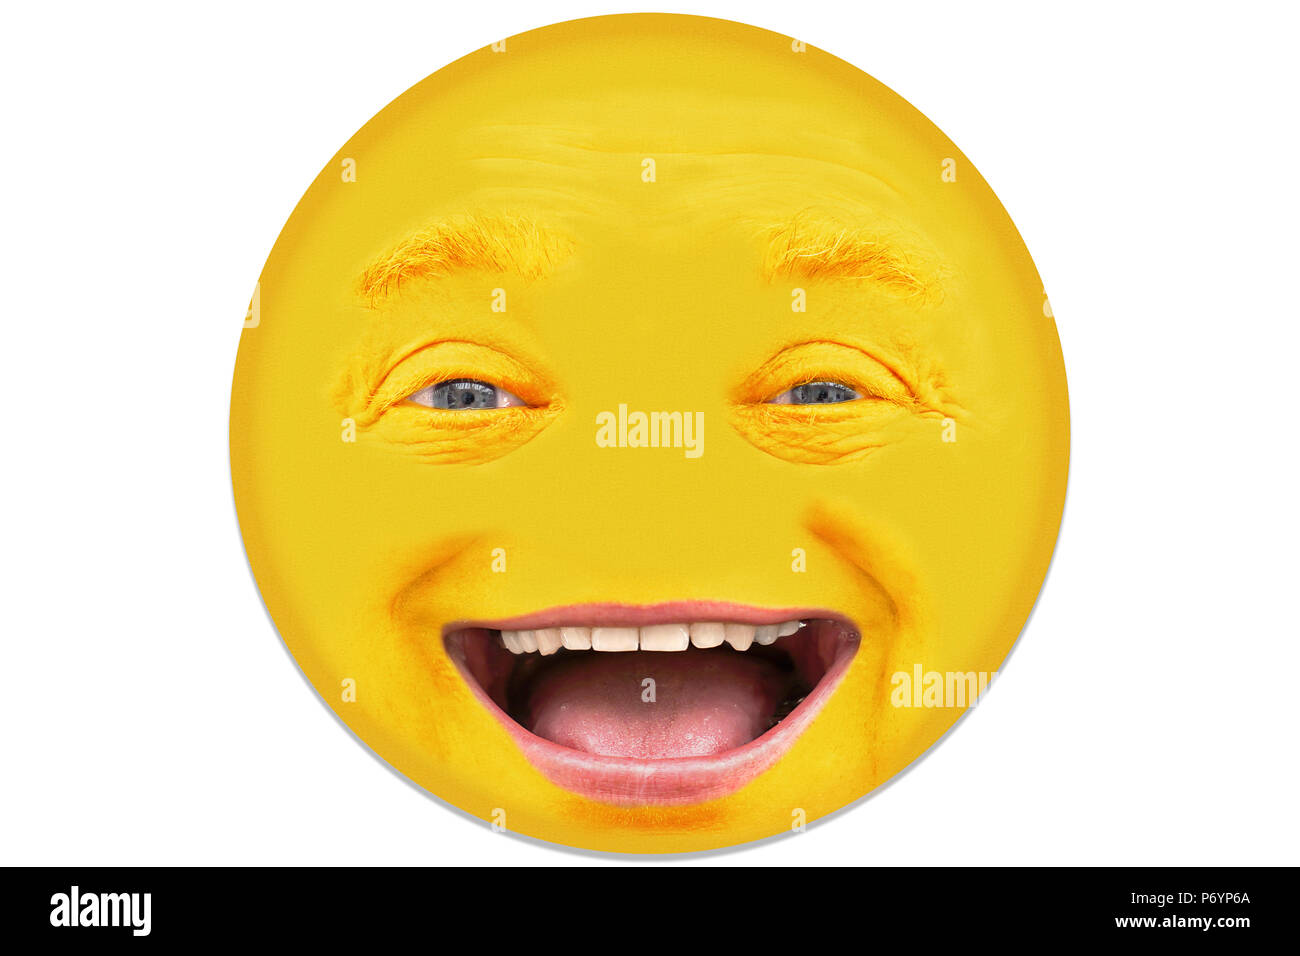 A man in his mid 40s laughs. The facial features have a lot of facial expressions. The face is circular cut out and isolated against white background. Stock Photo